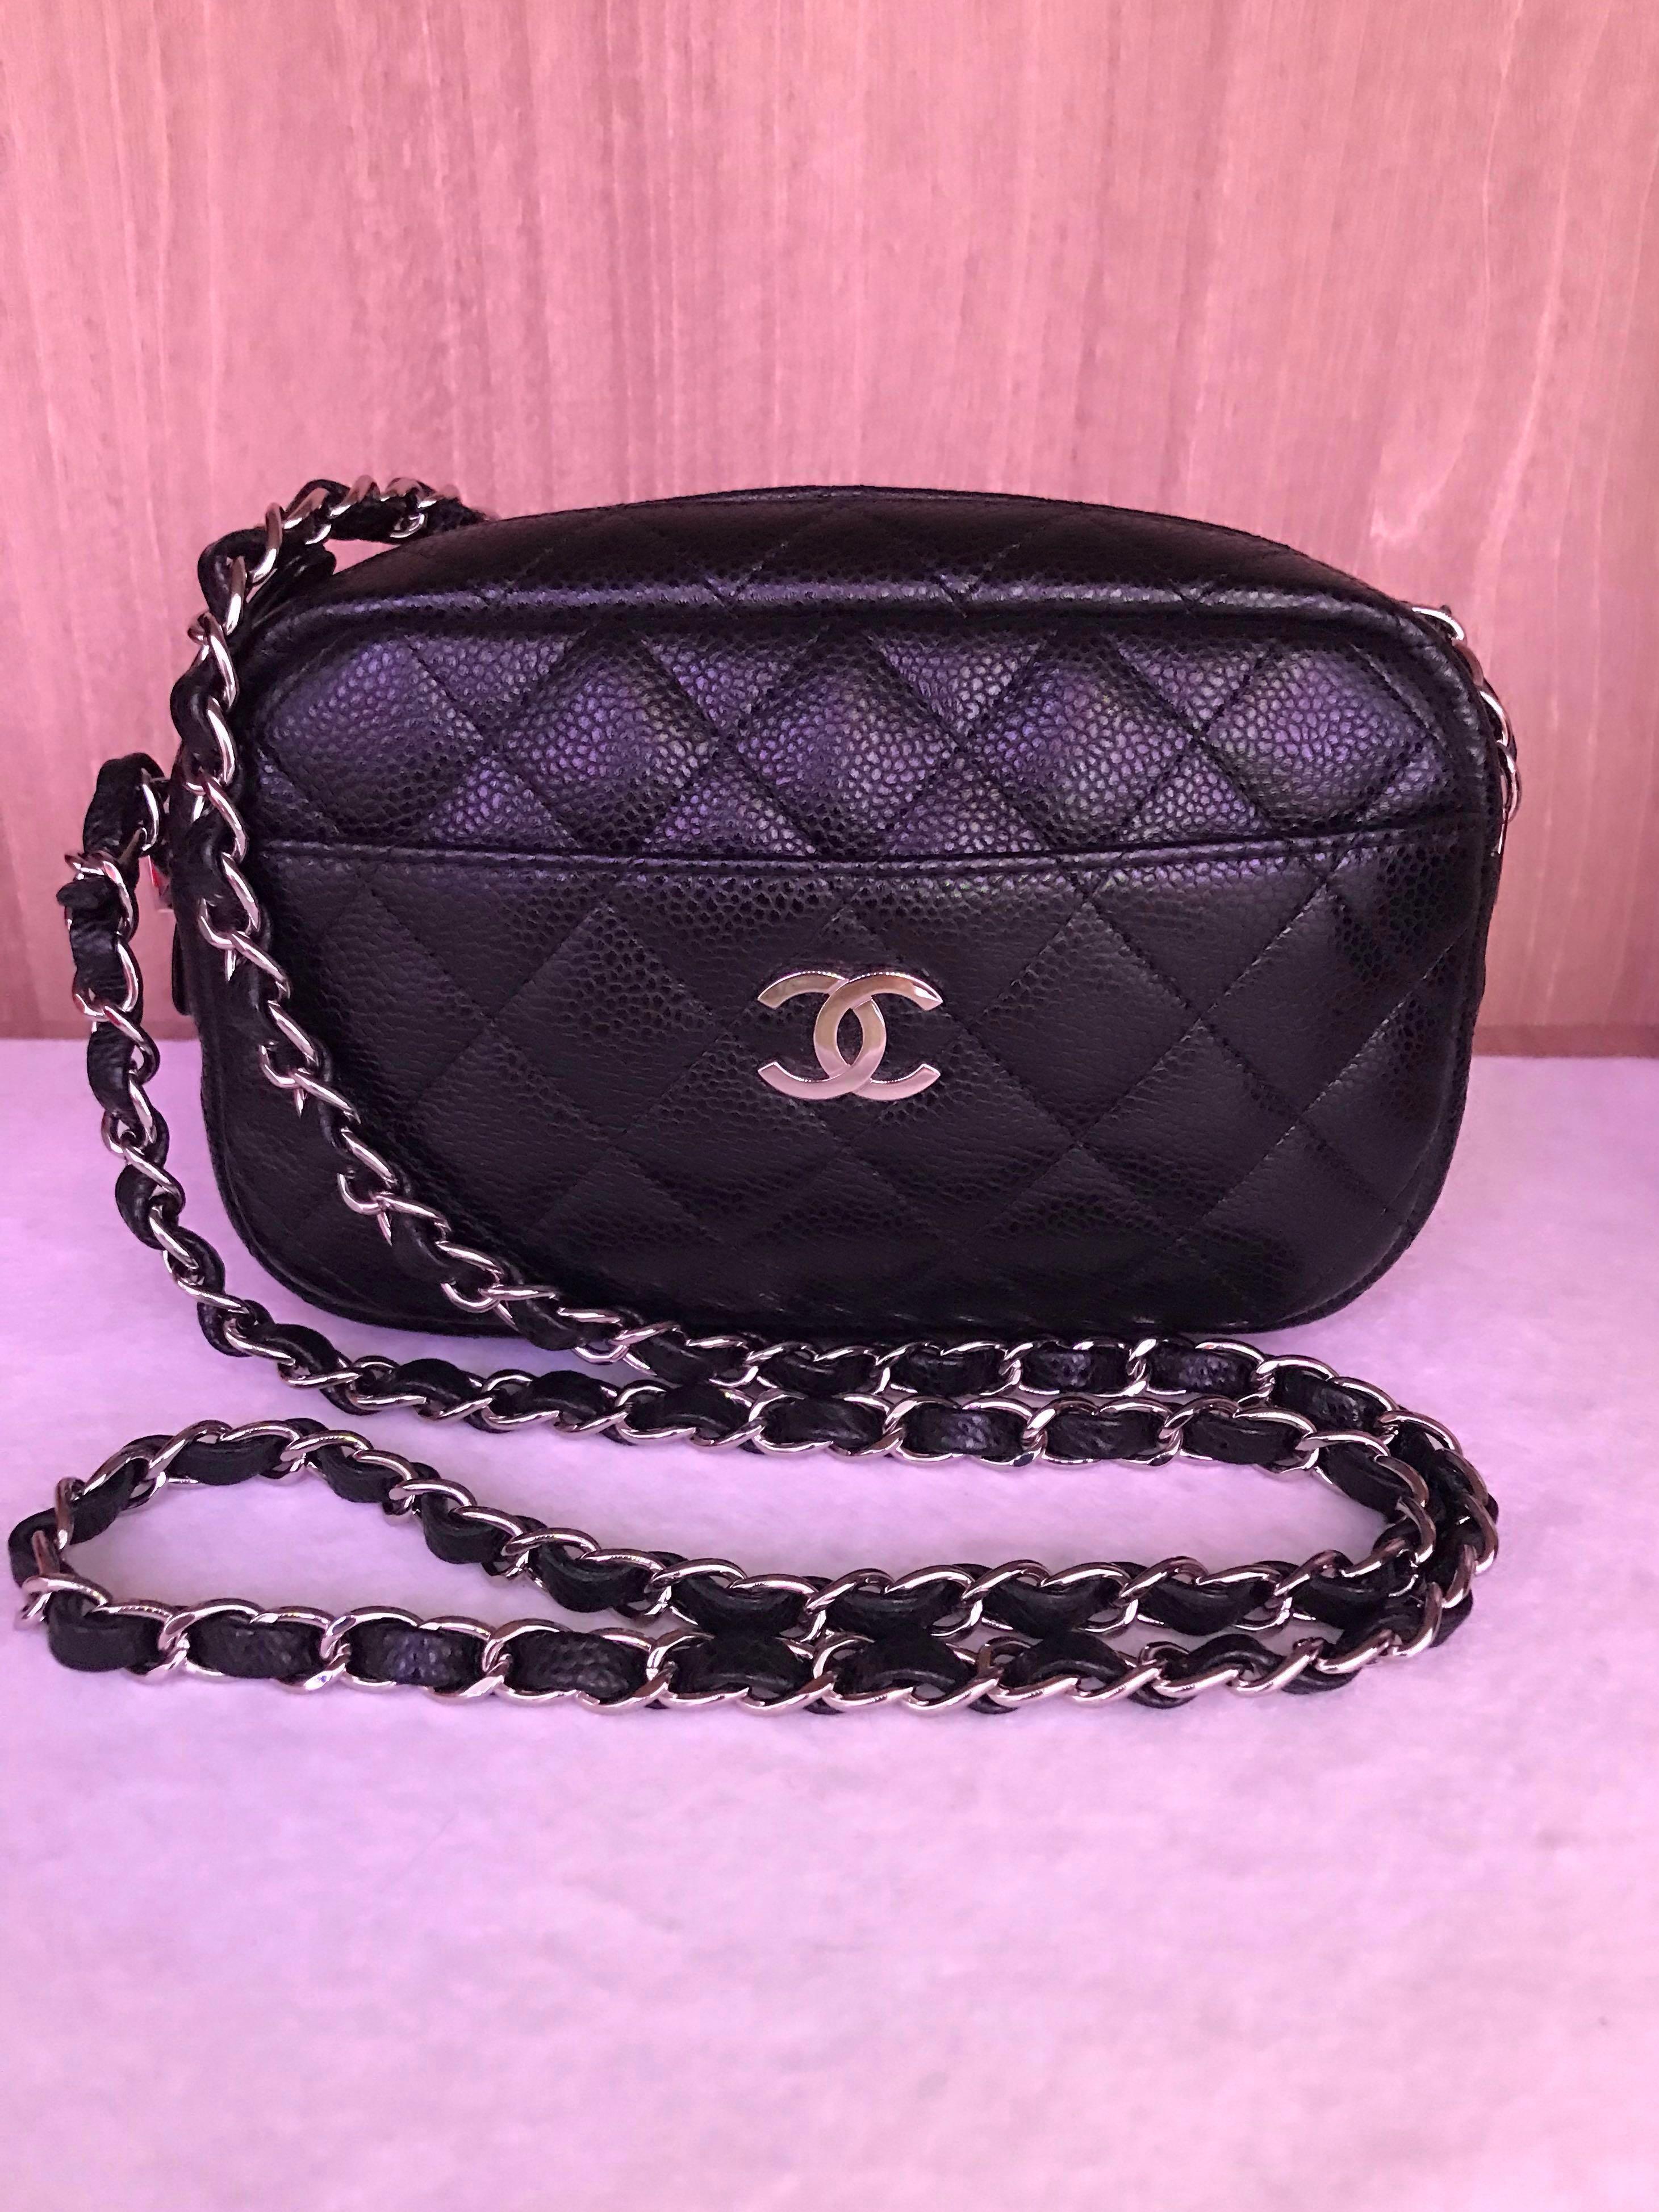 Chanel Coco Envelope and Camera Case Bags From Cruise 2016  Spotted Fashion